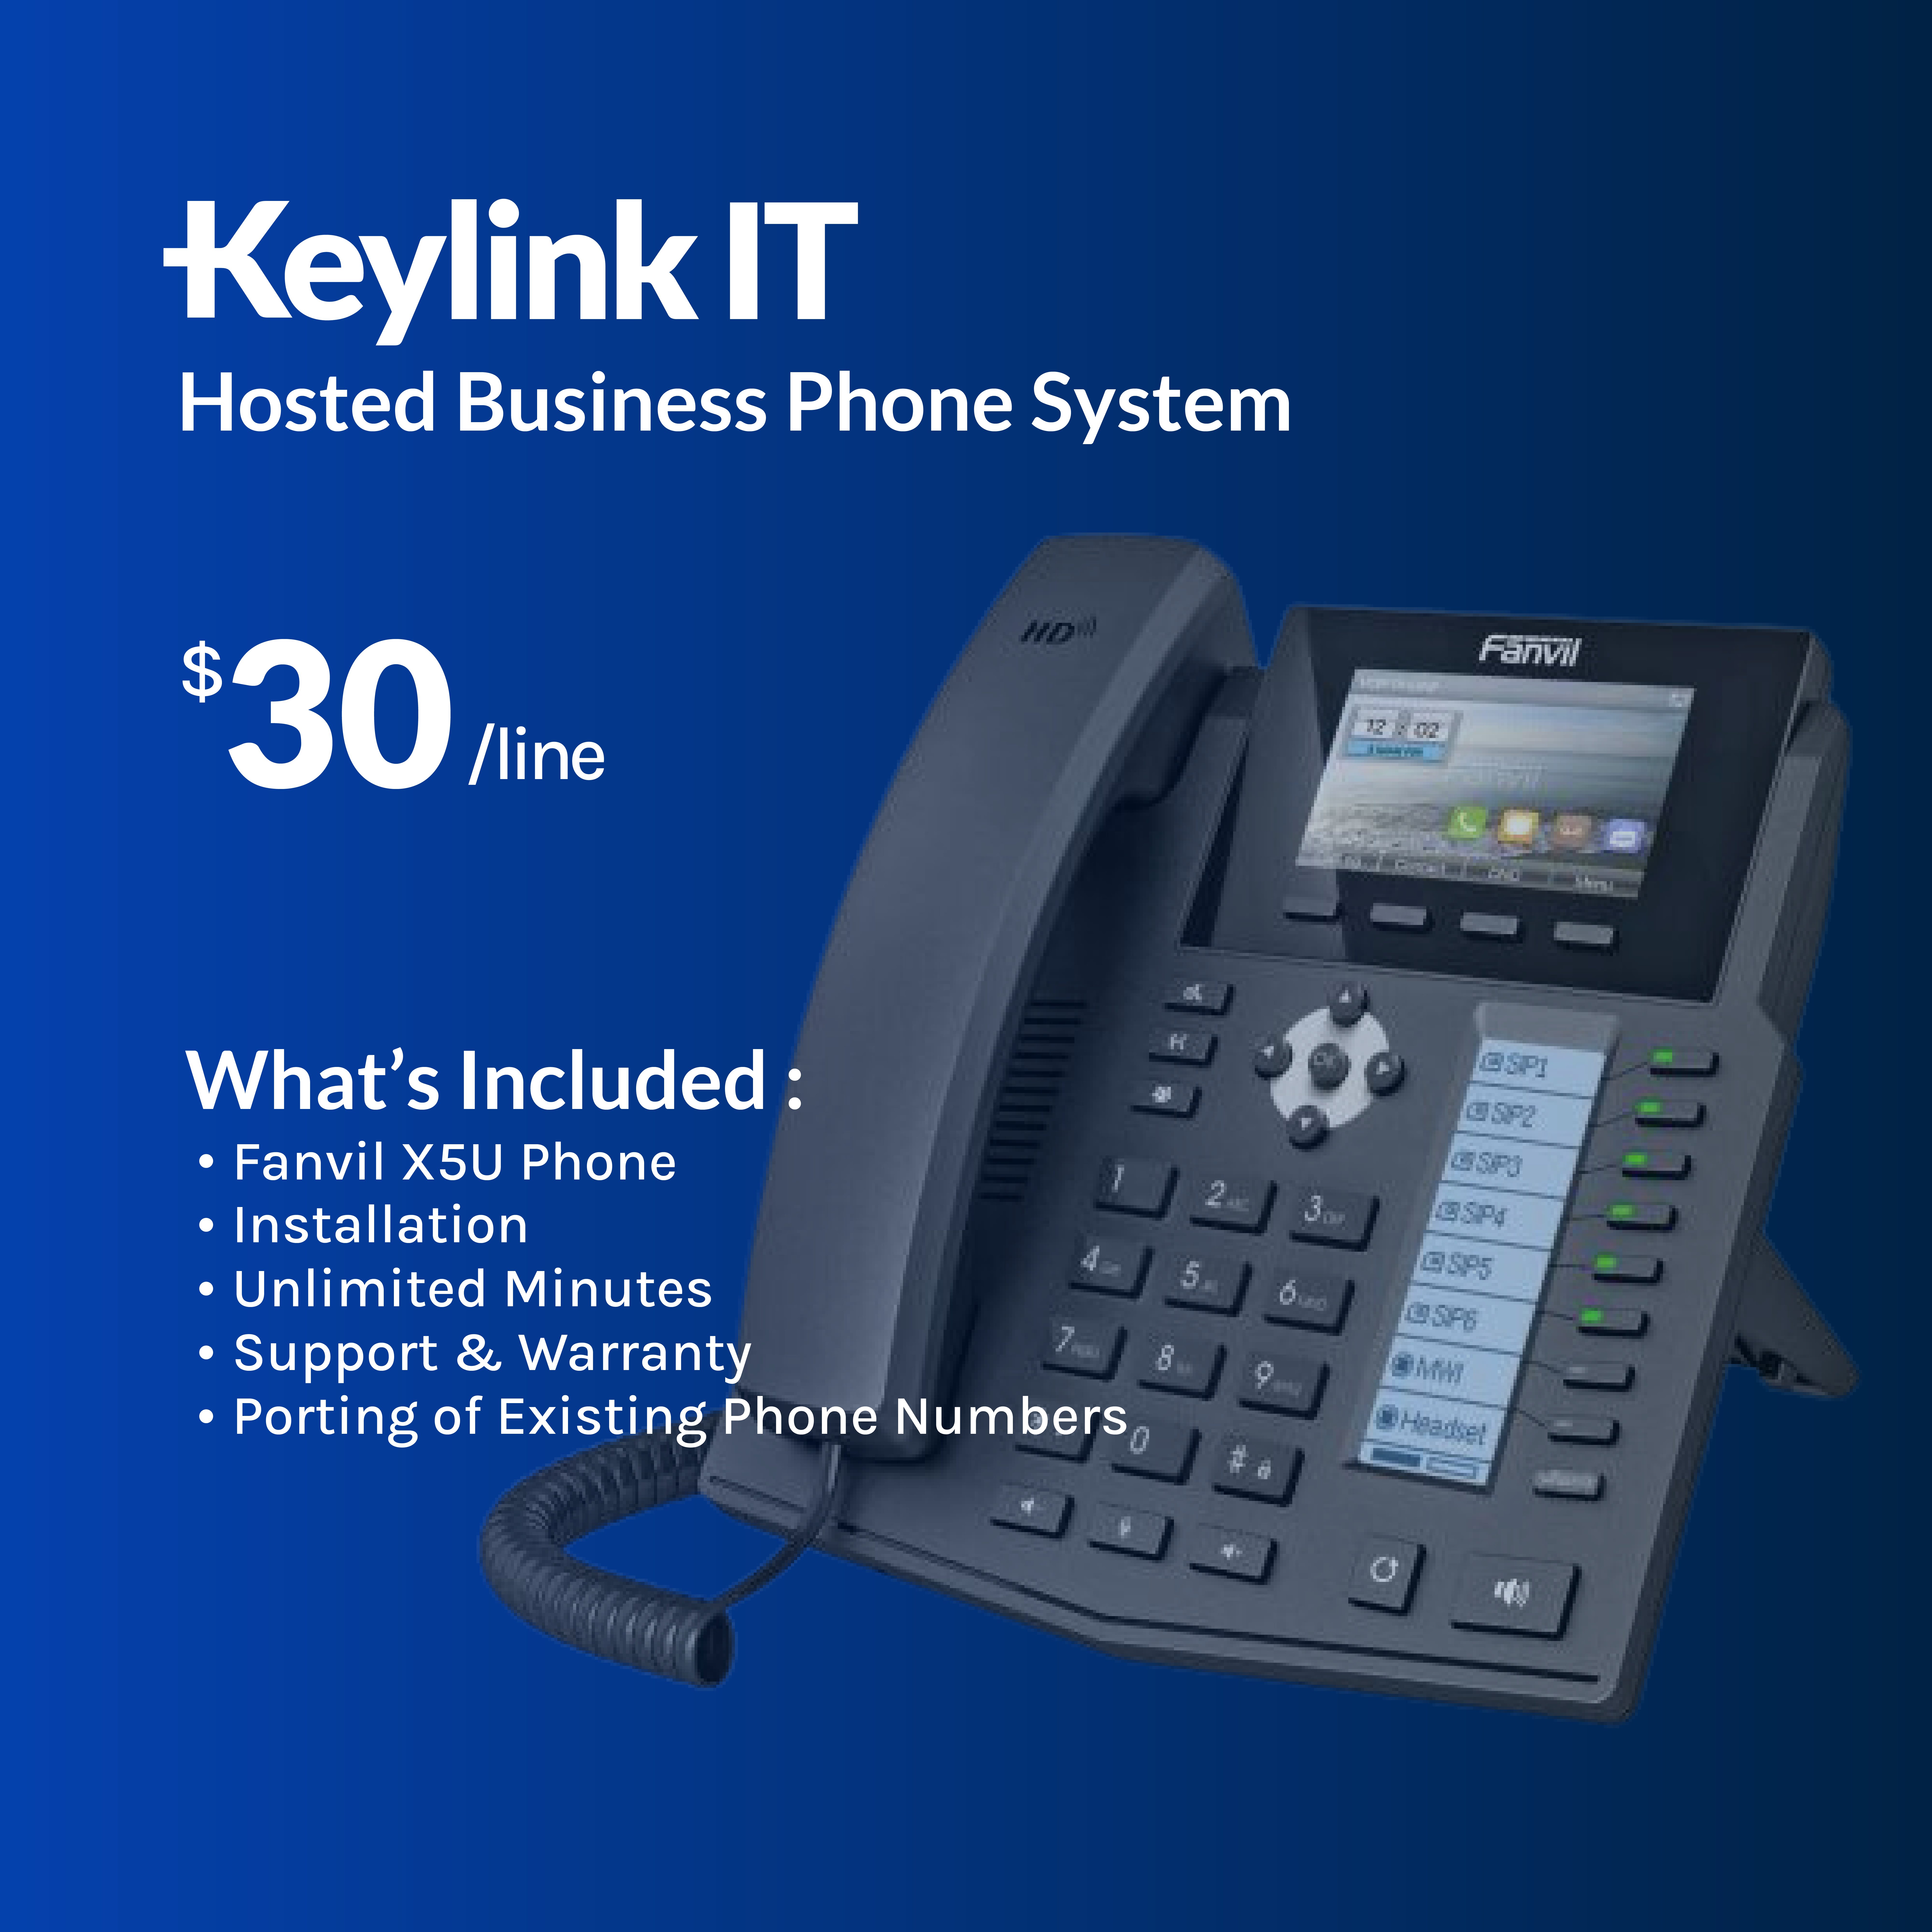 Hosted Business Phone System $30 a line